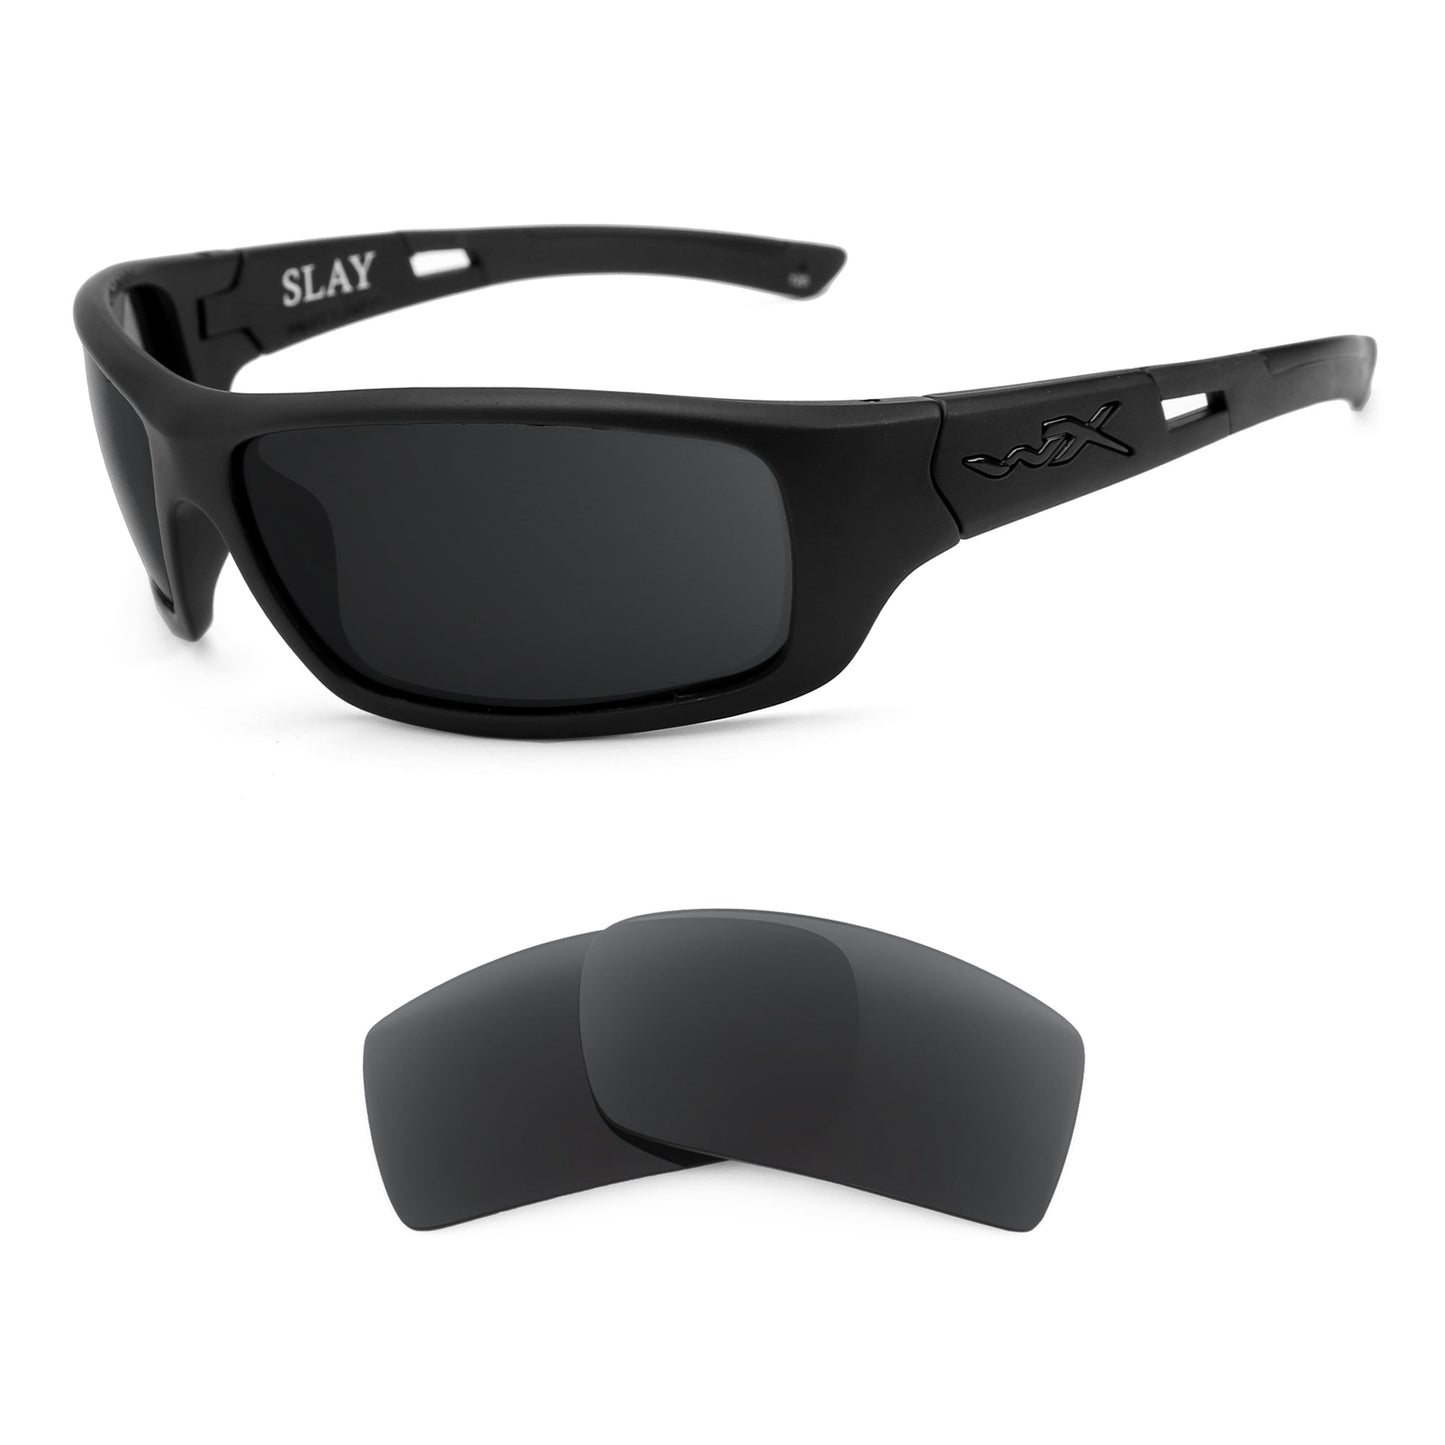 Wiley X Slay sunglasses with replacement lenses